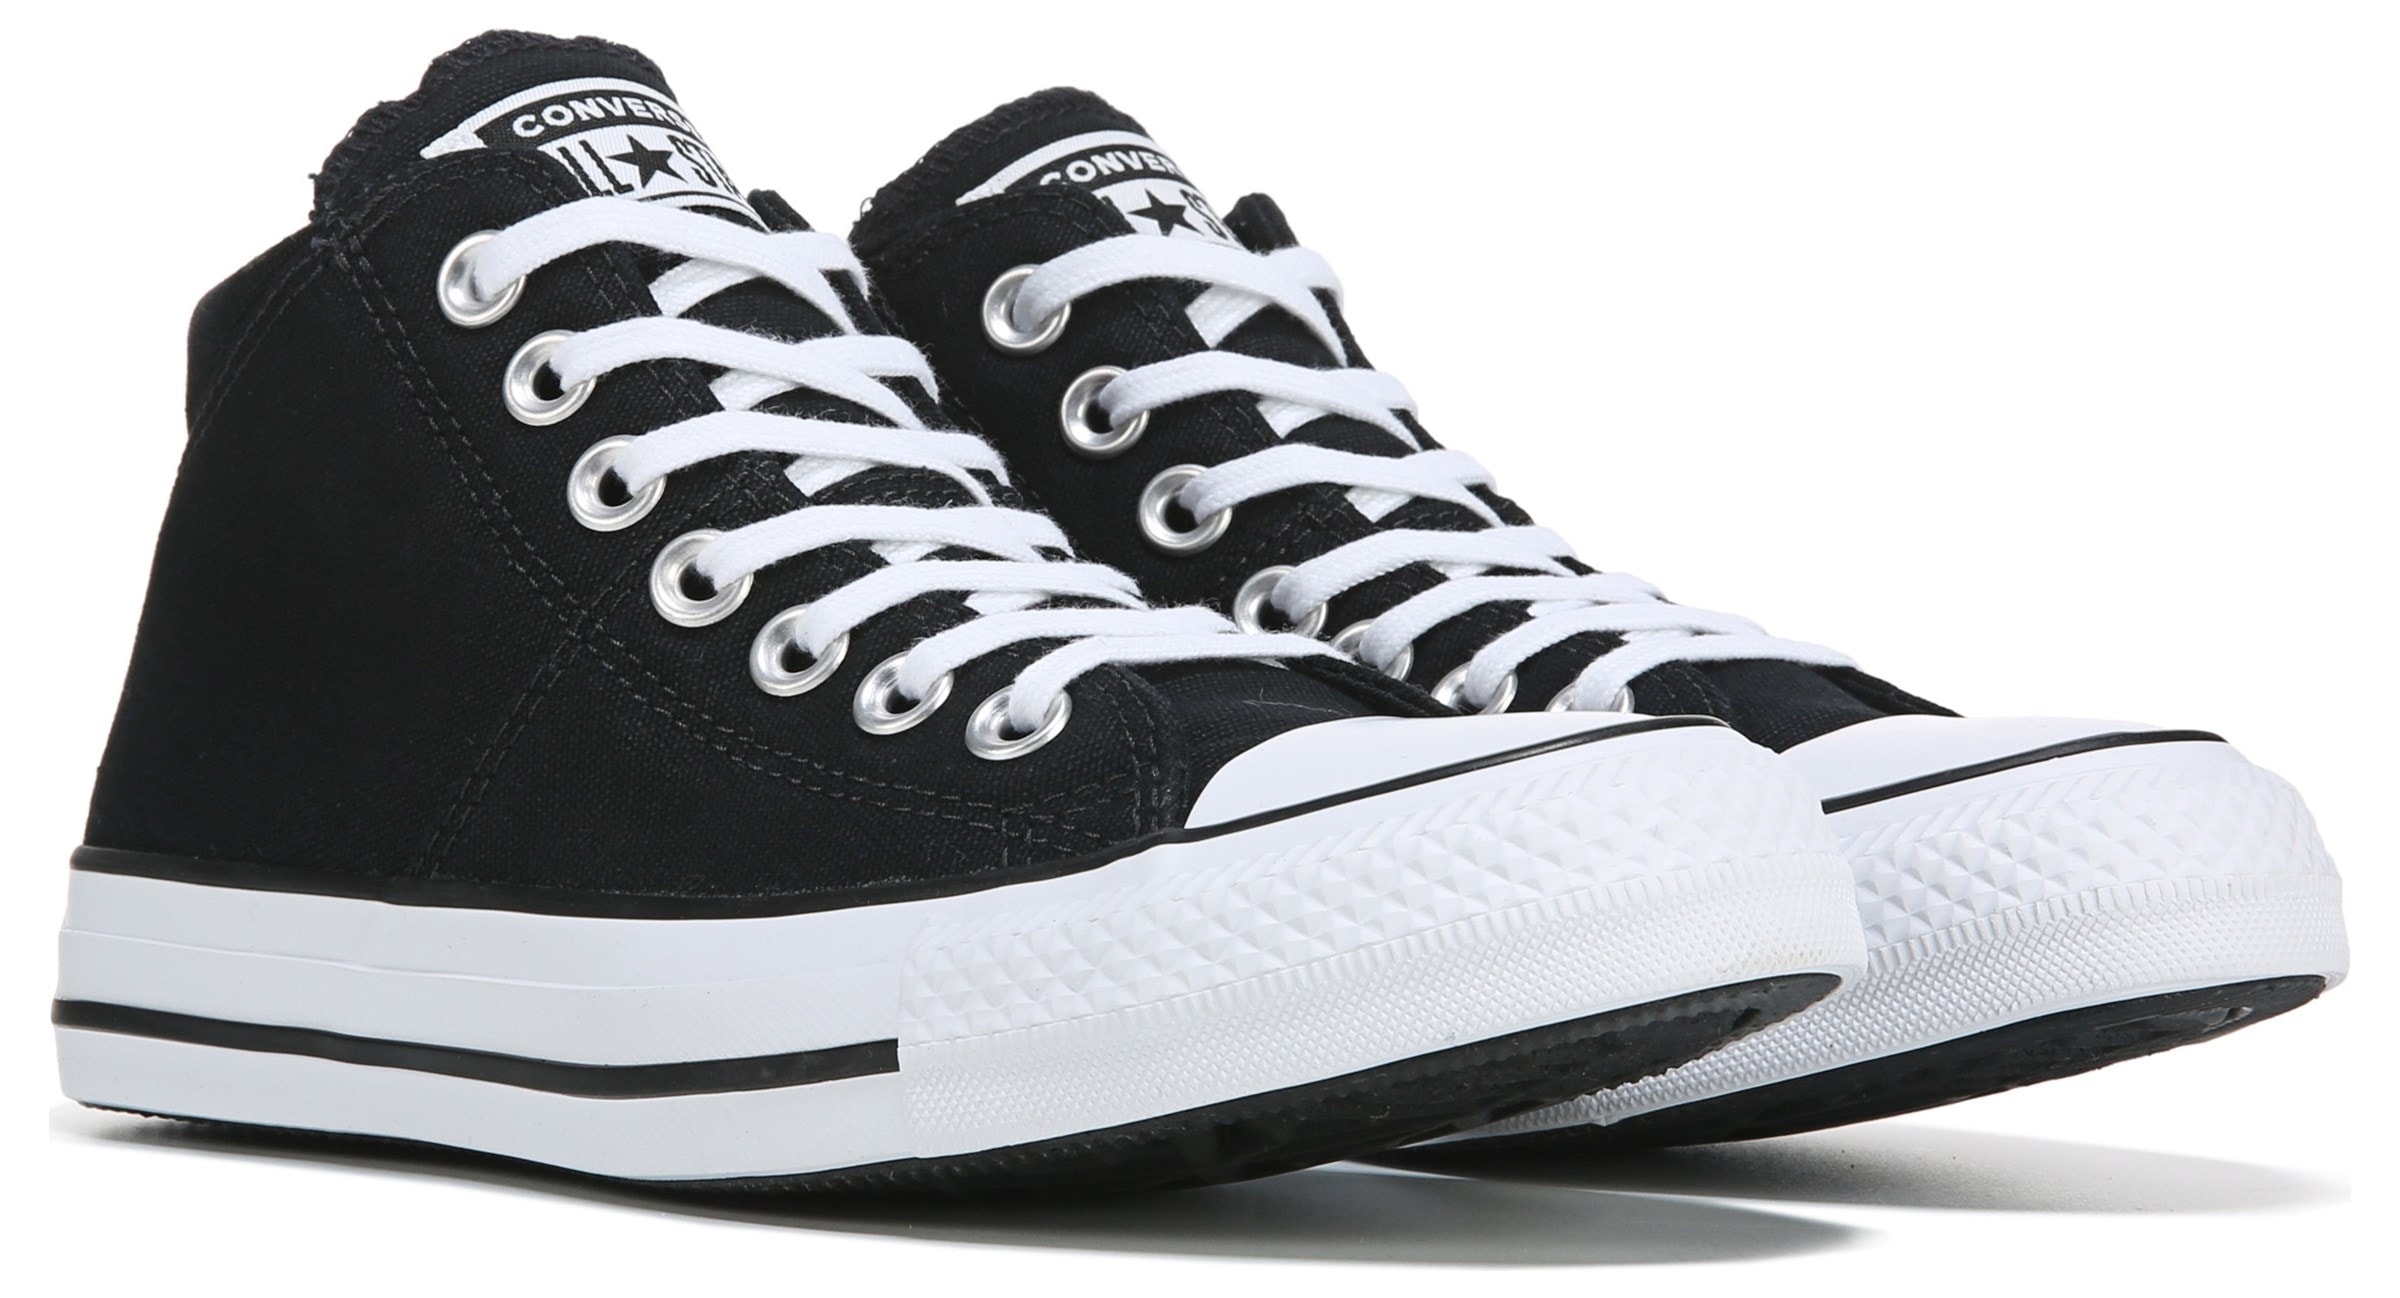 Does Famous Footwear Sell Converse? - Shoe Effect